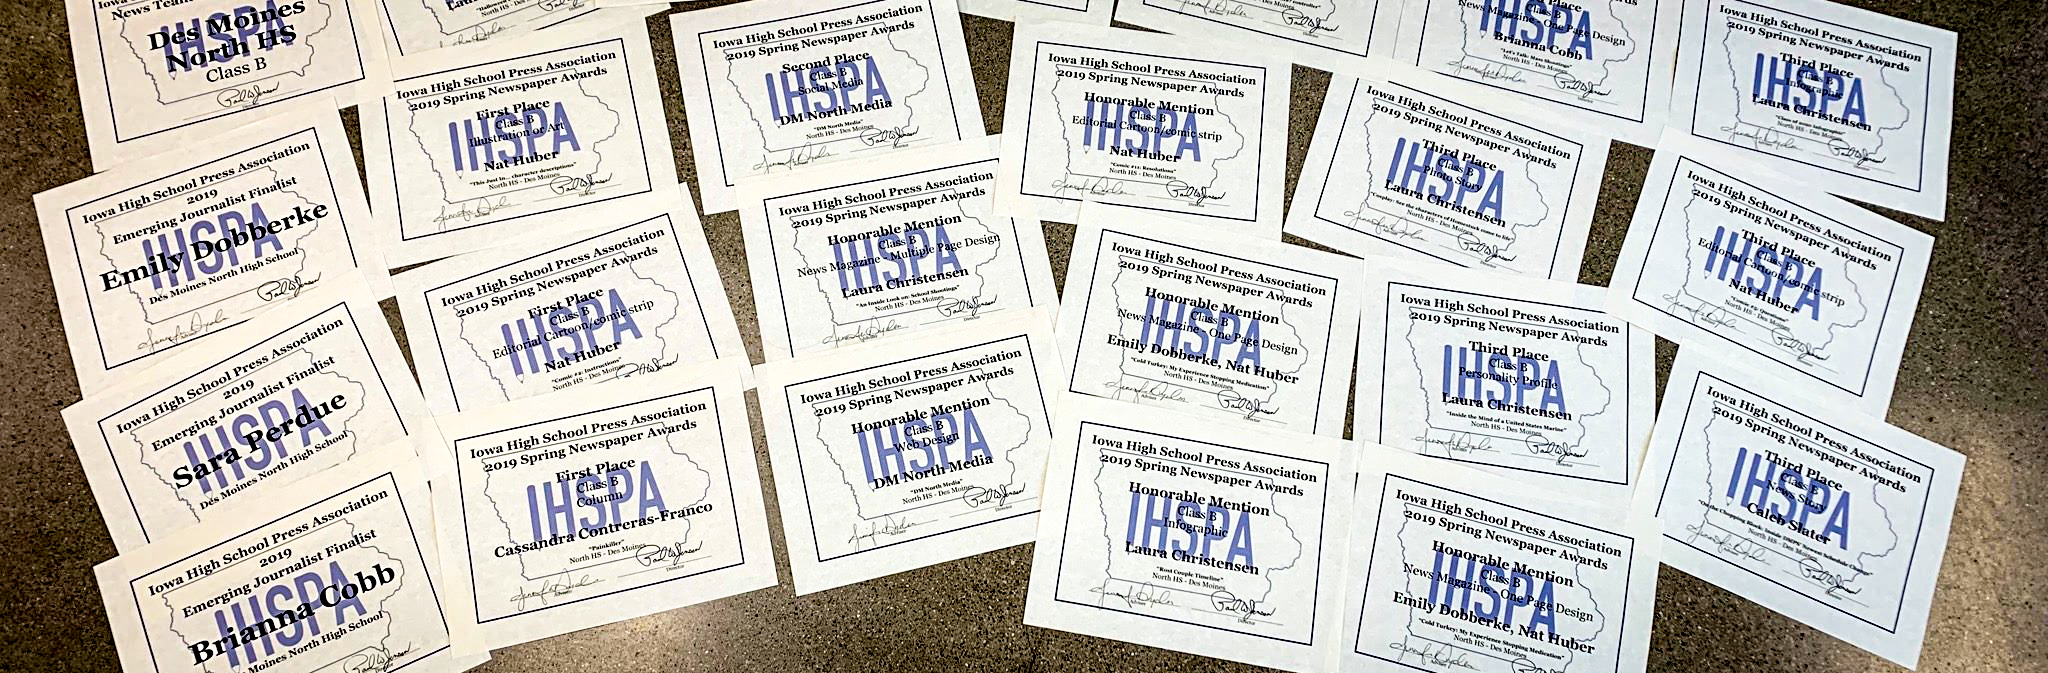 Student-Journalists Earn 31 Awards at IHSPA Contest